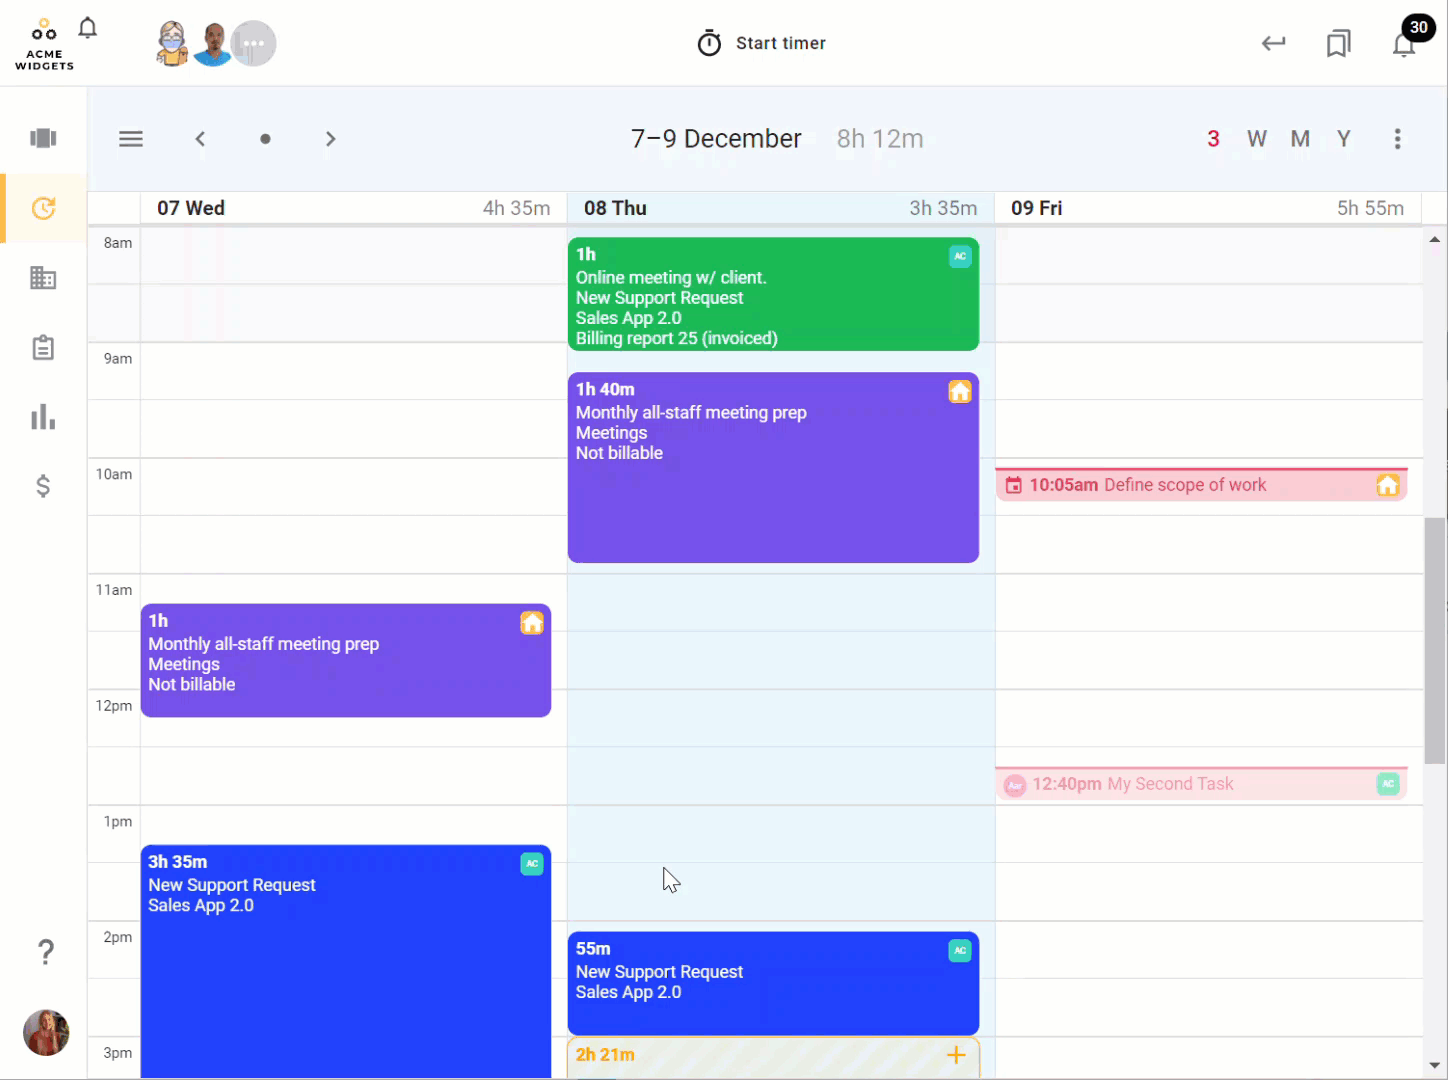 An animated GIF demonstrating how a User can add client and project details to a time entry in seconds in todo.vu's calendar.